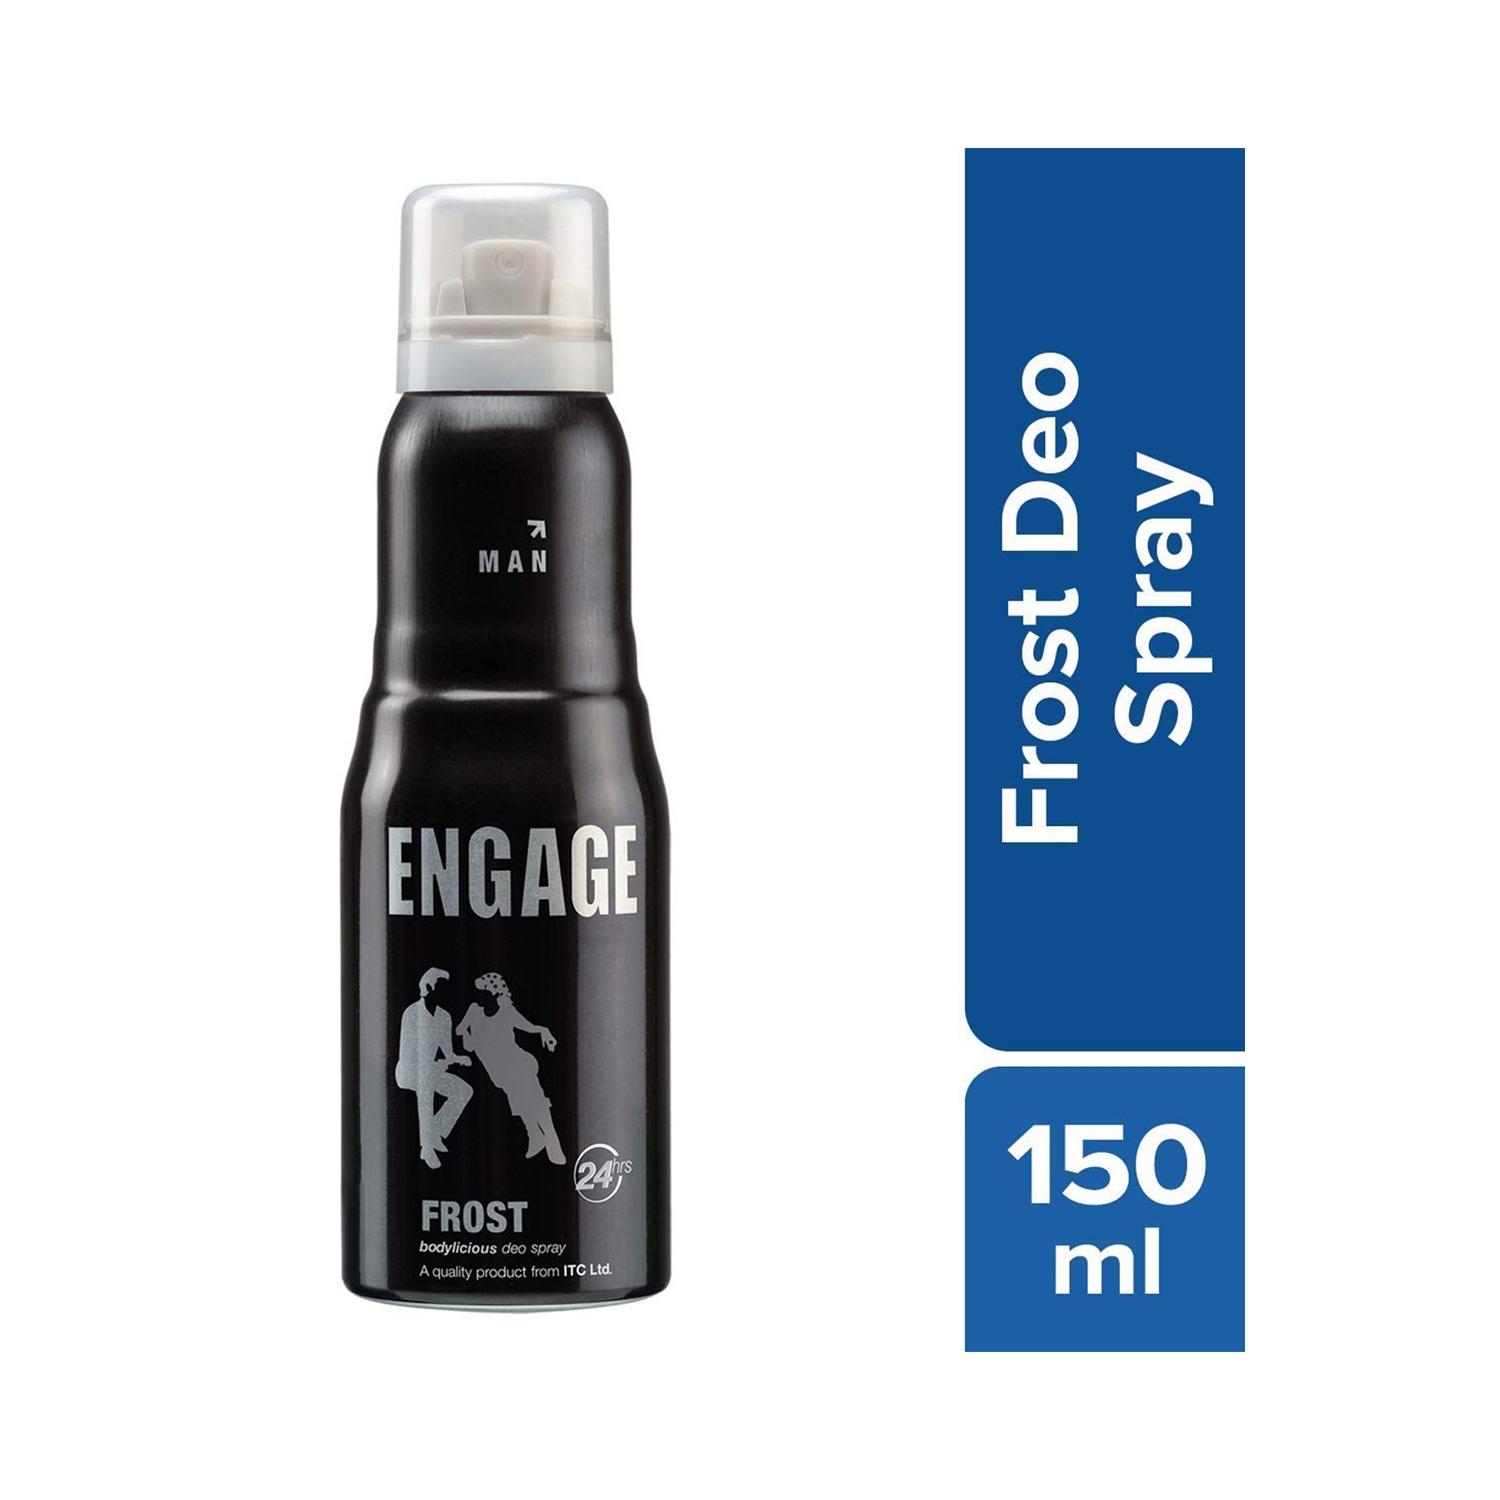 Engage | Engage Frost Deodorant Spray For Man (150ml)